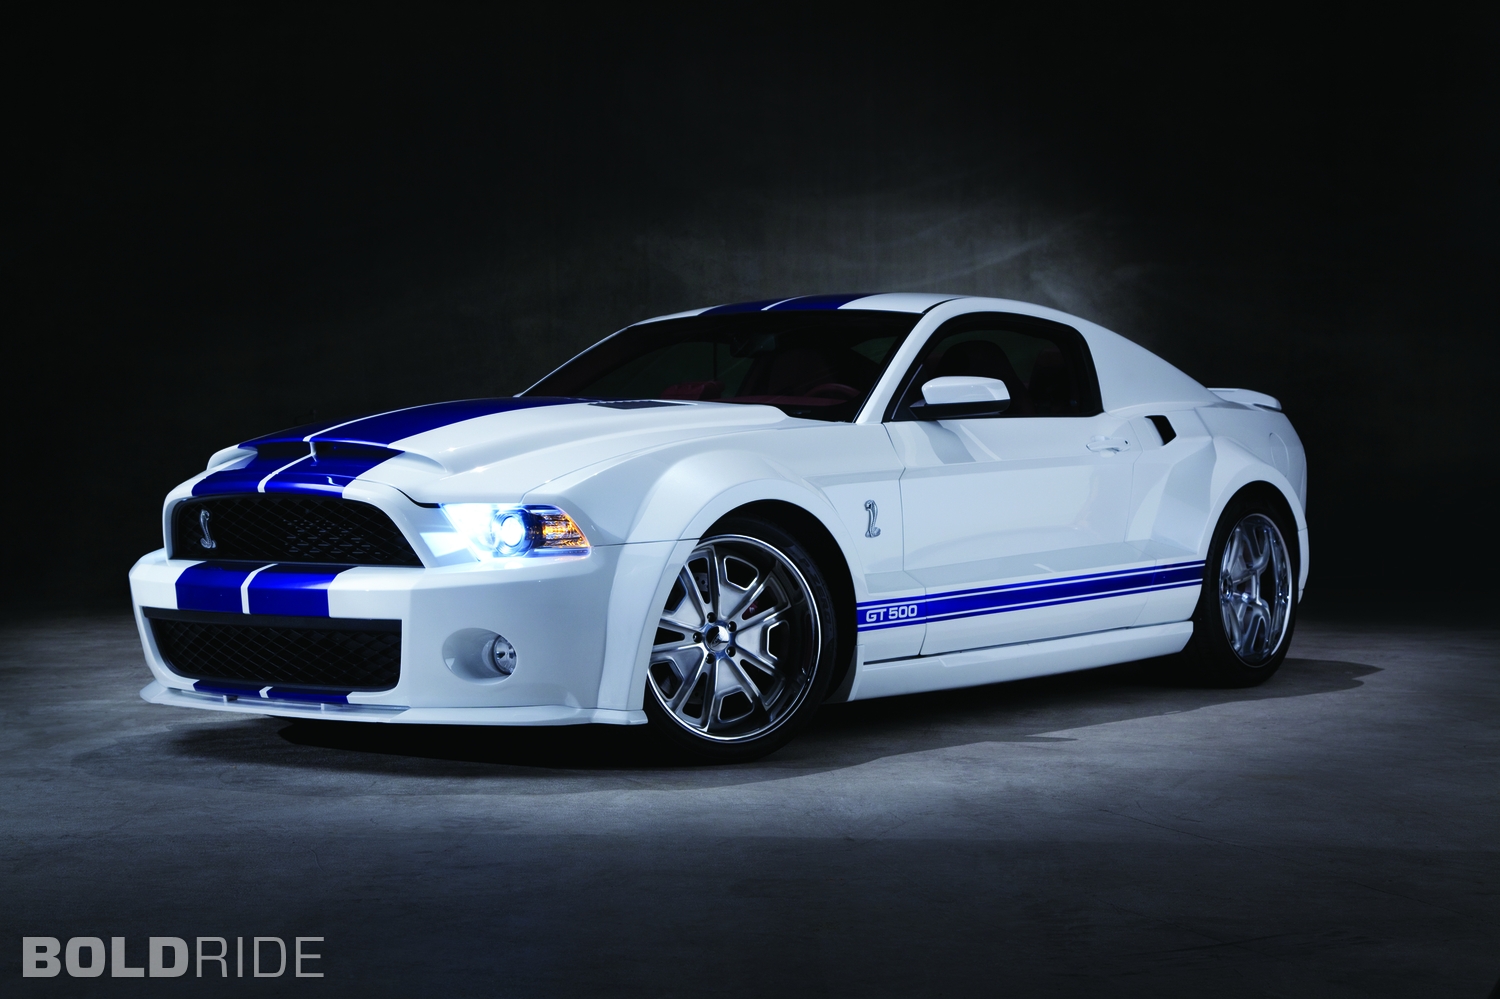 Ford Shelby Cobra Gt500 Wallpaper Anh Photo